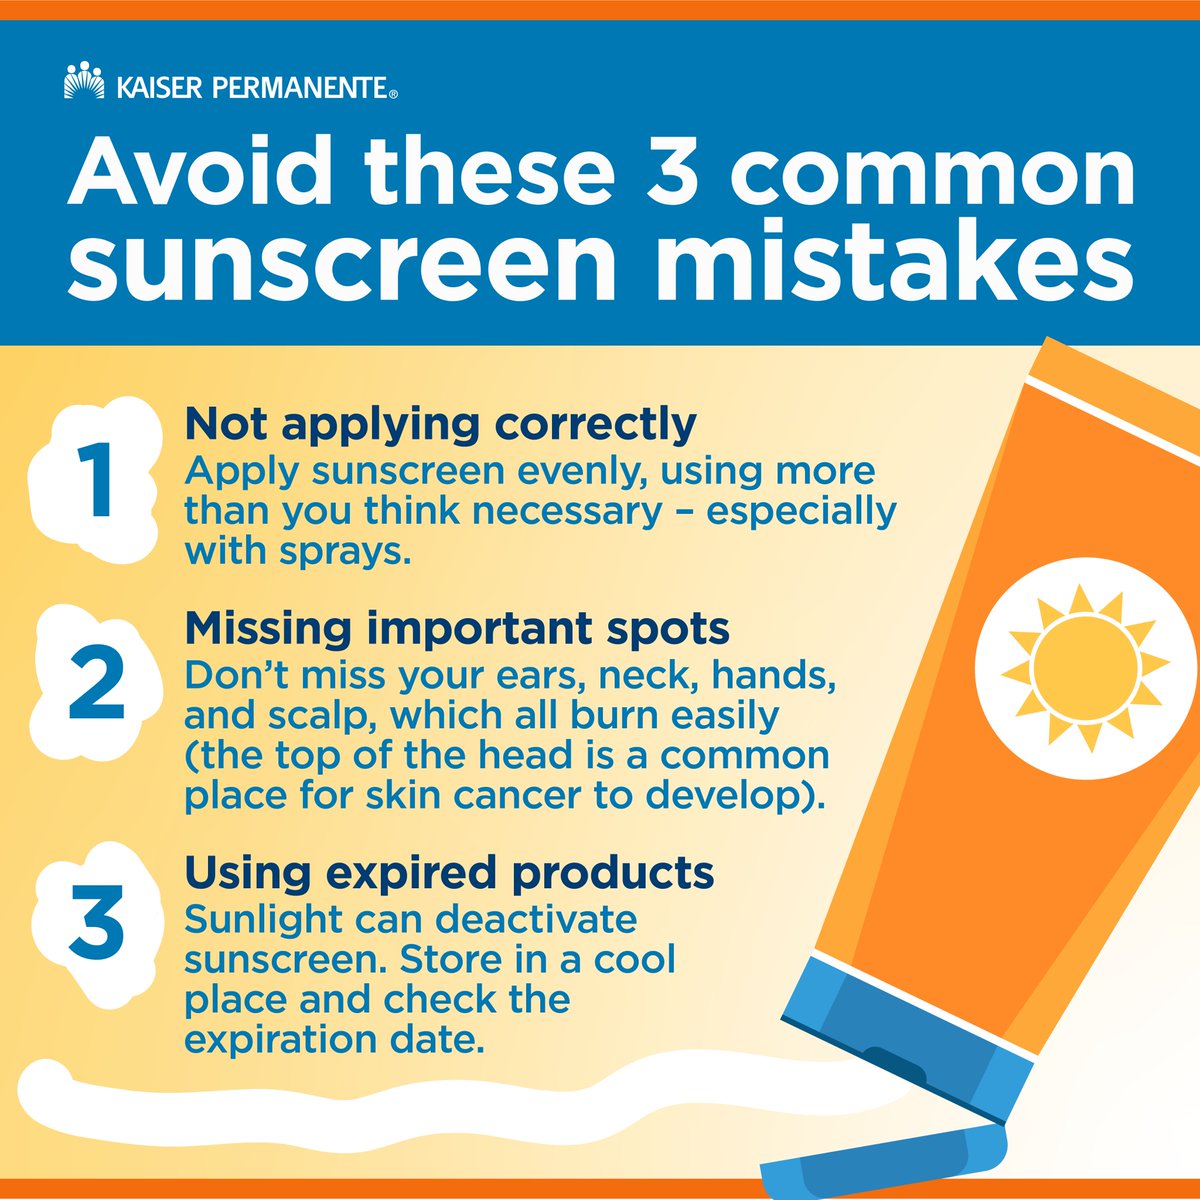 It’s easy to make mistakes when using sunscreen. Here are the most common ones. Learn more: k-p.li/4dzKKnH